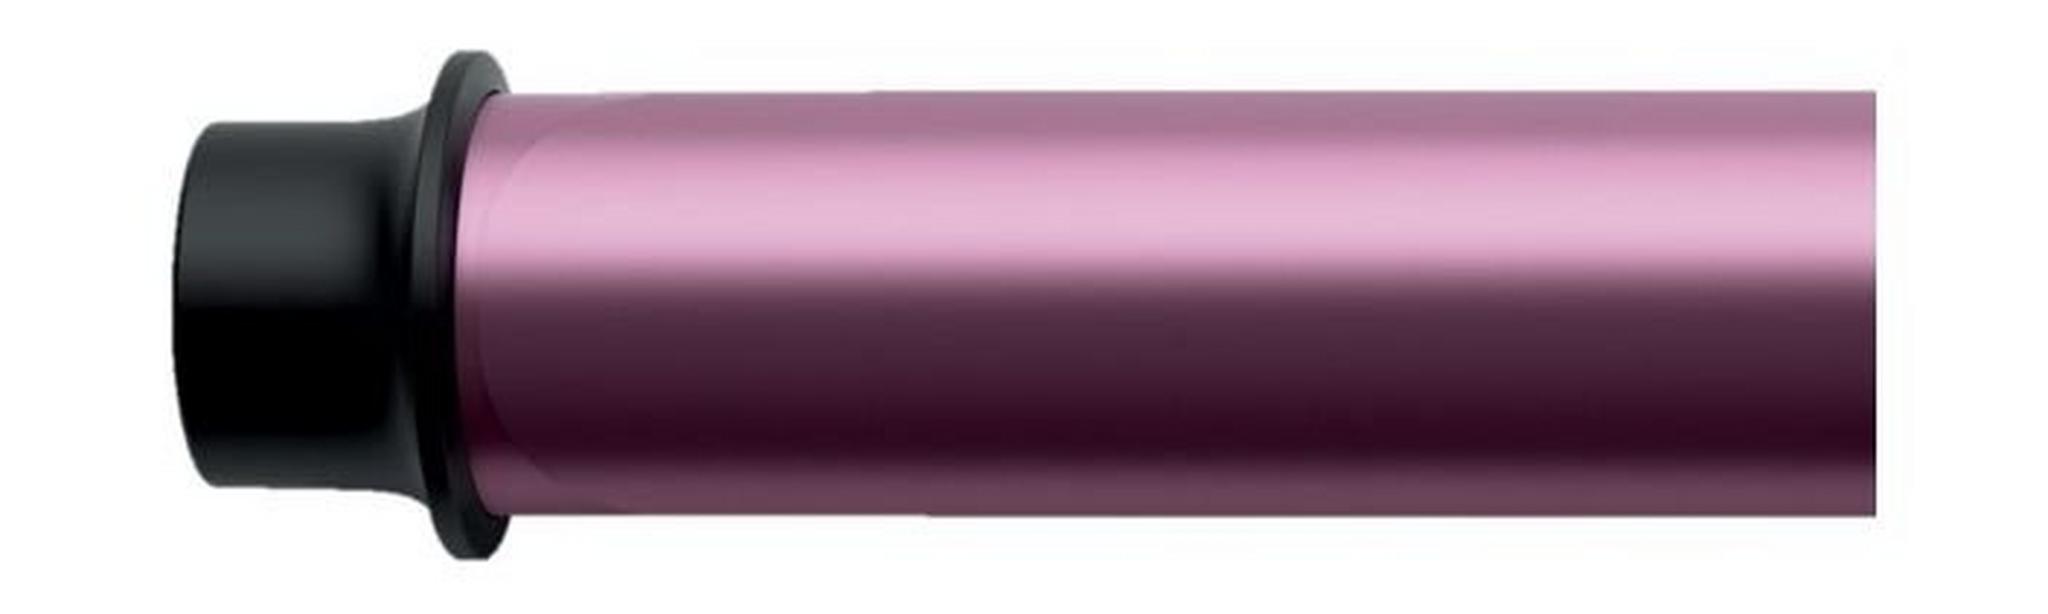 Philips StyleCare Sublime Ends Curler (BHB869/03) – Pink / Black